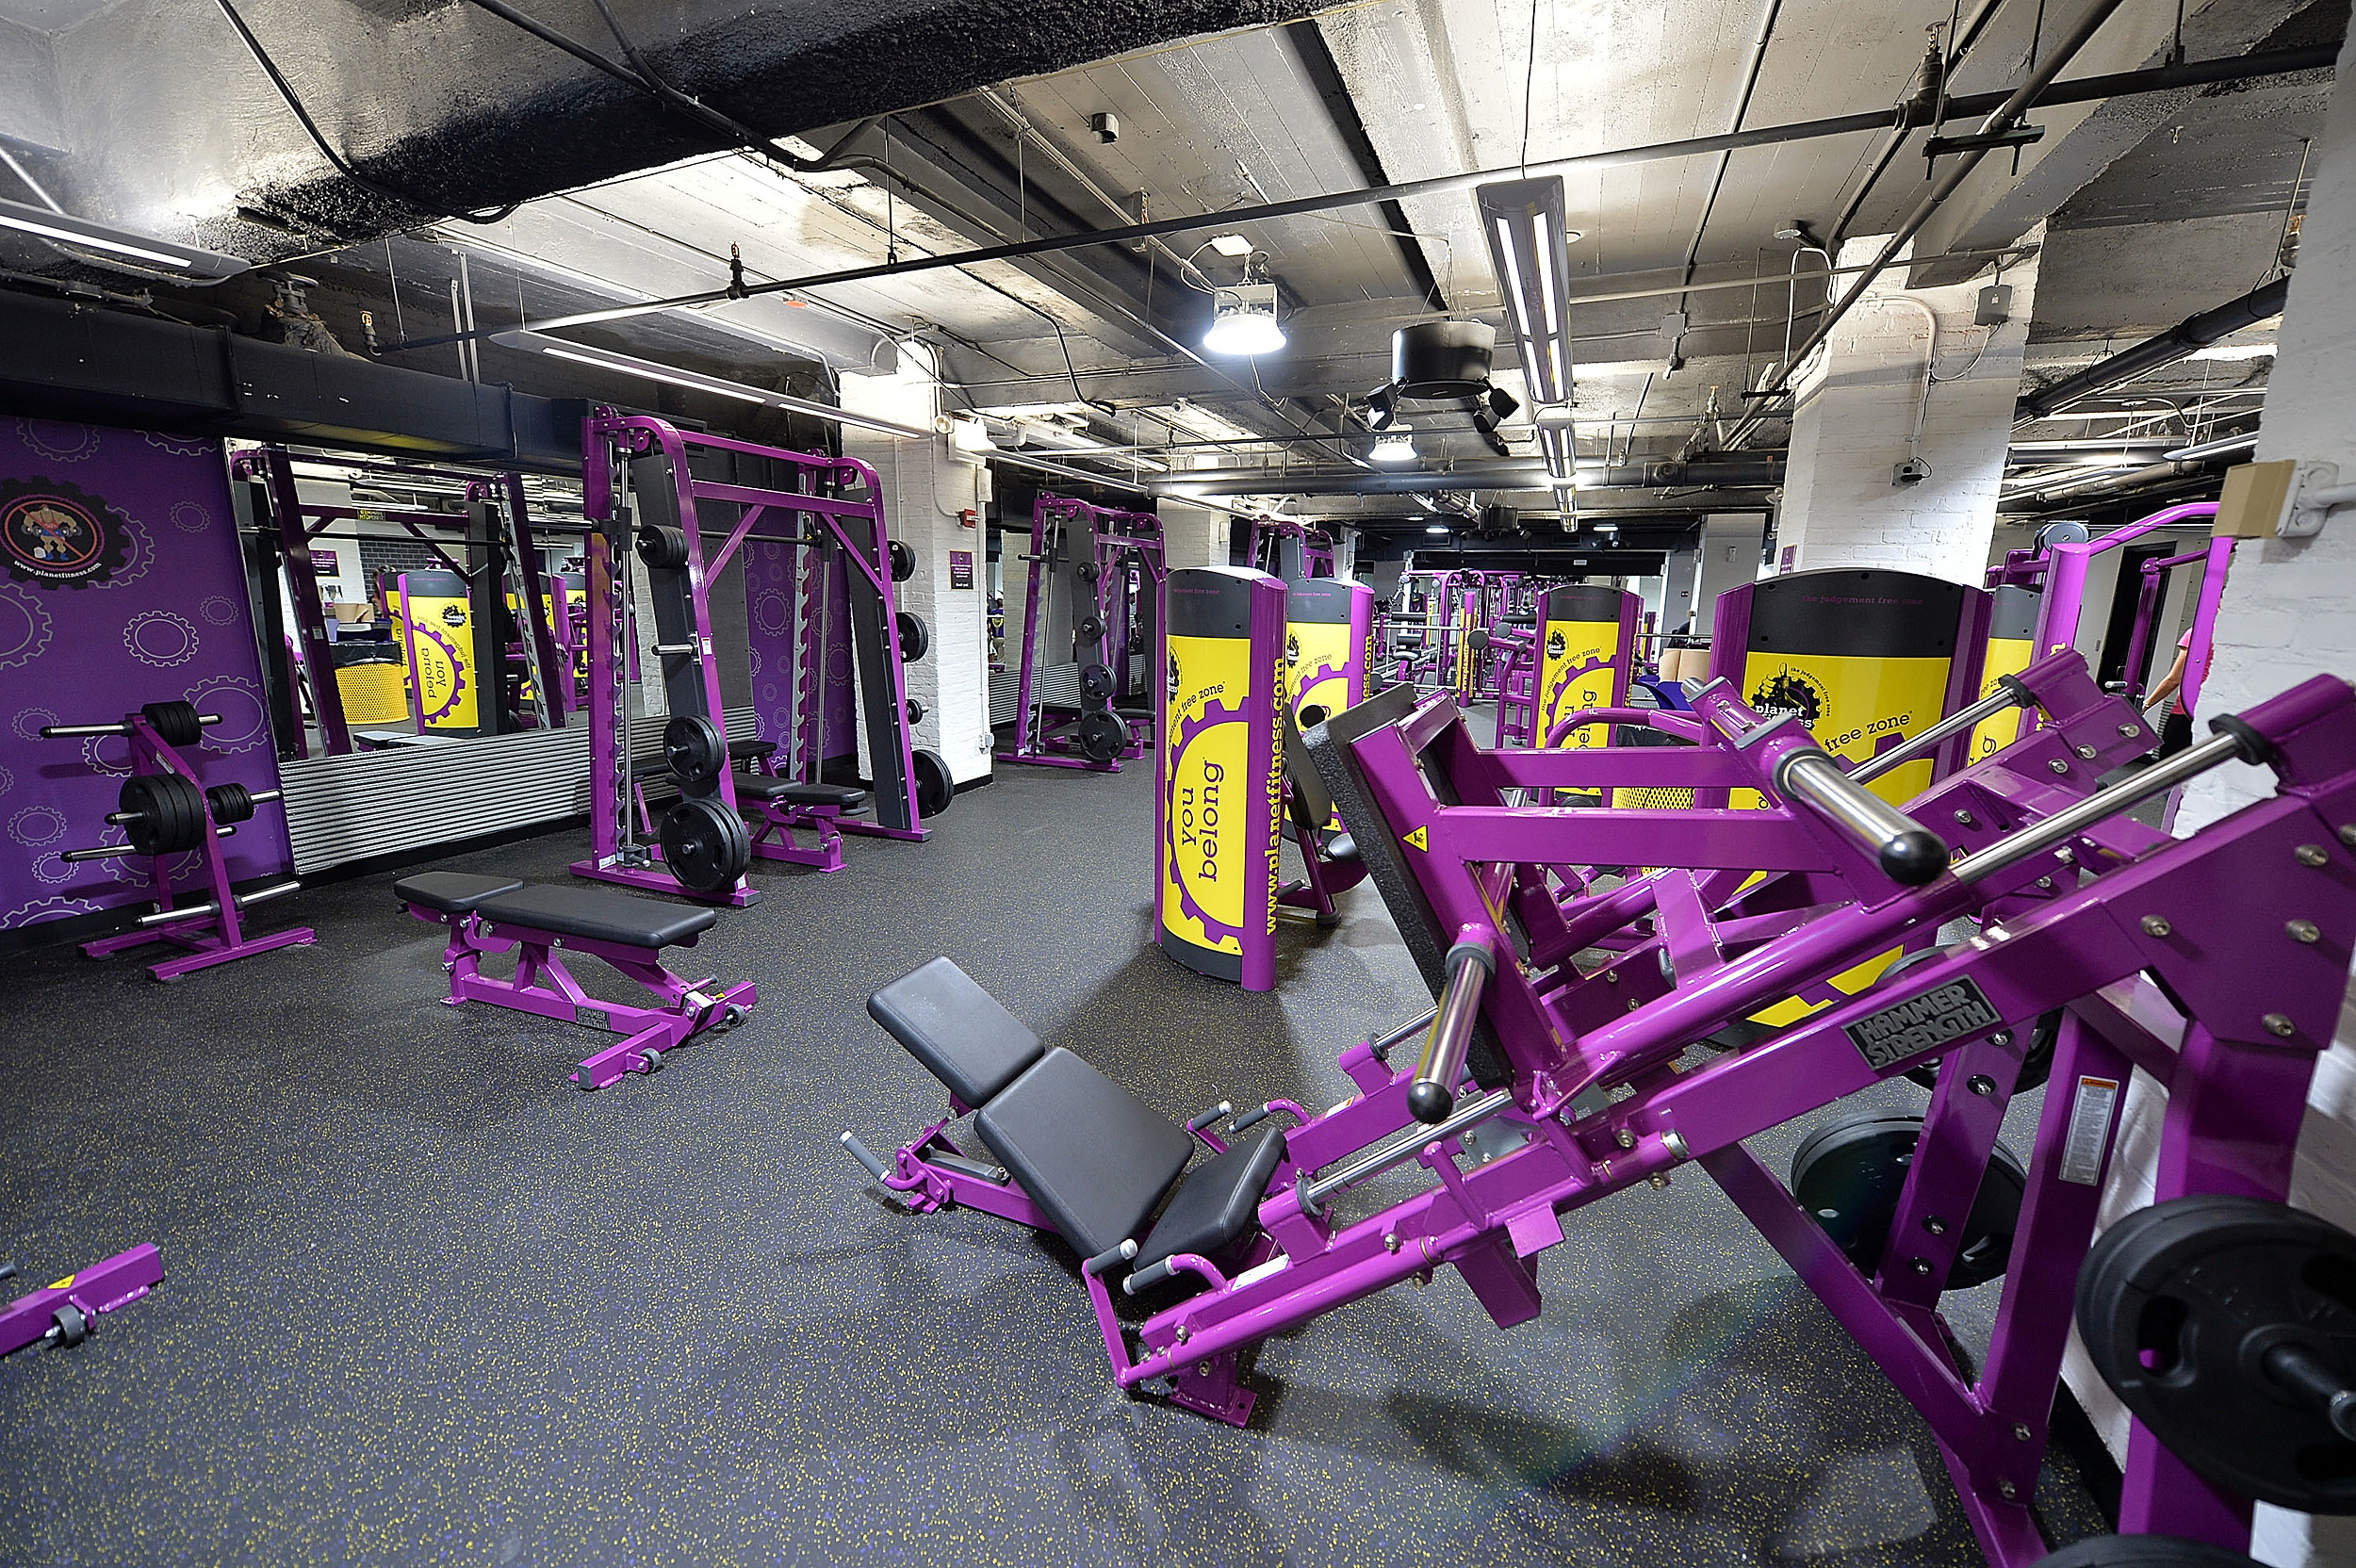 30 Minute How To Use Free Weights At Planet Fitness for Push Pull Legs